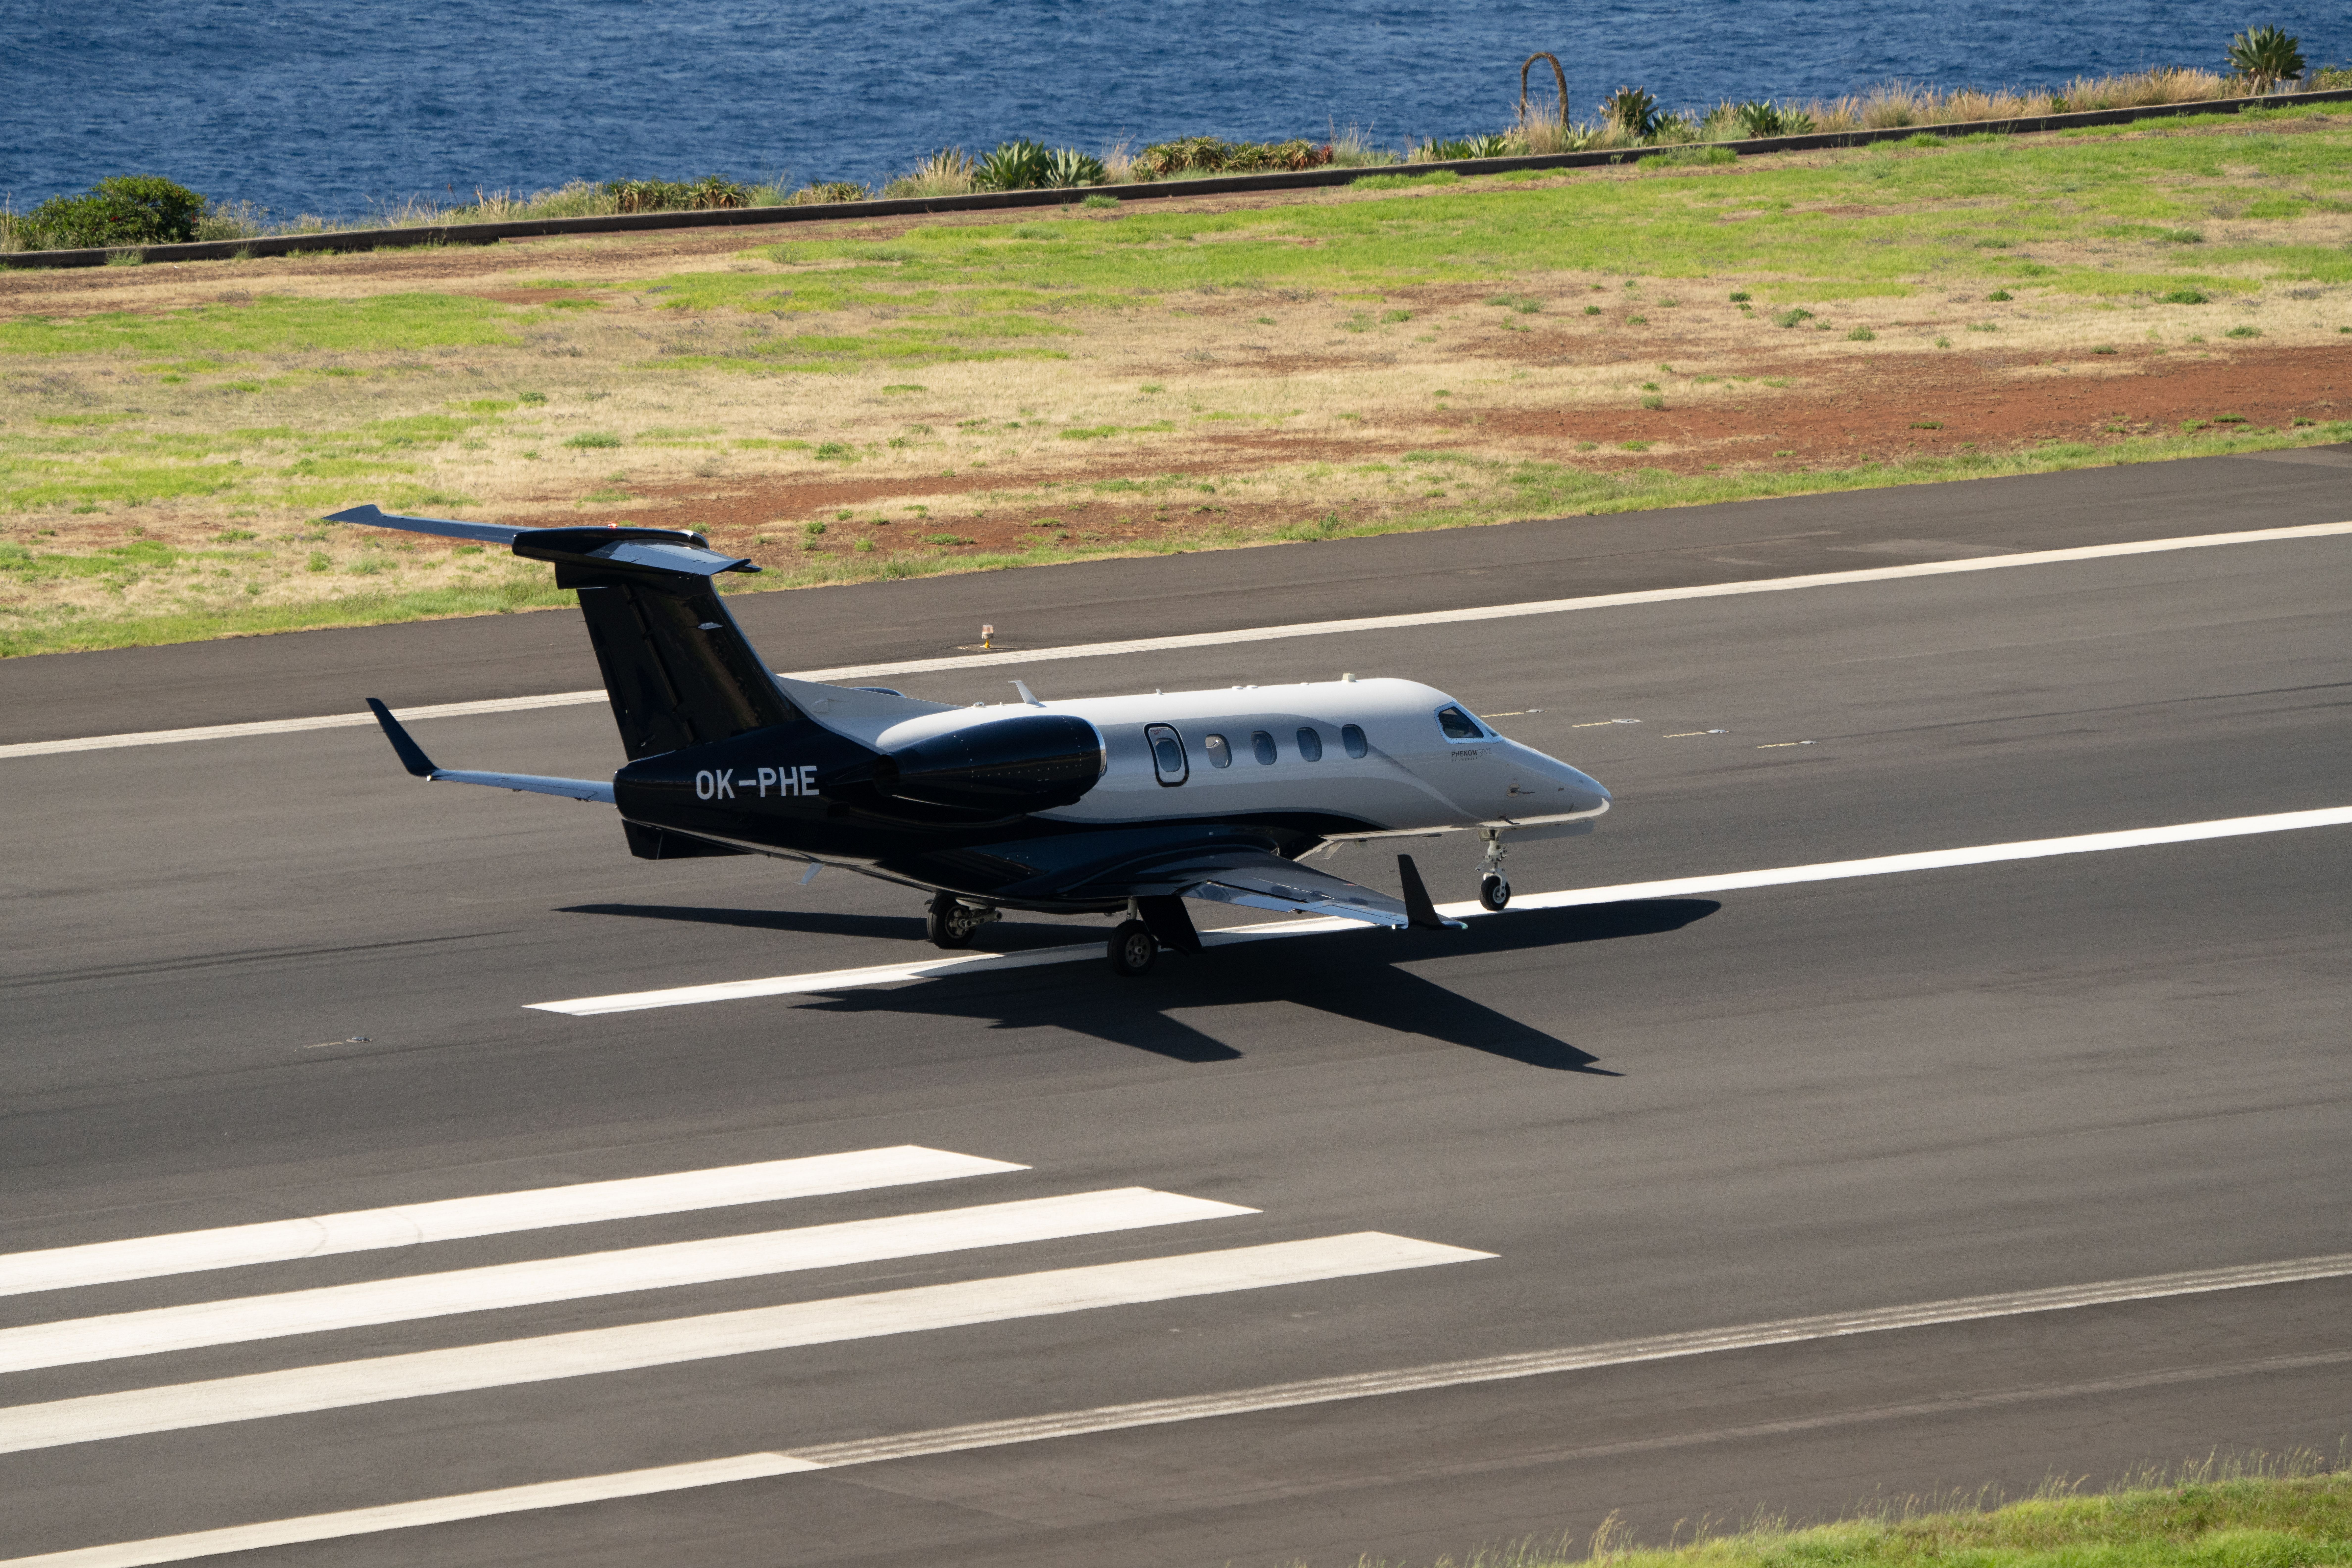 An Embraer Phenom 300E On a runway.